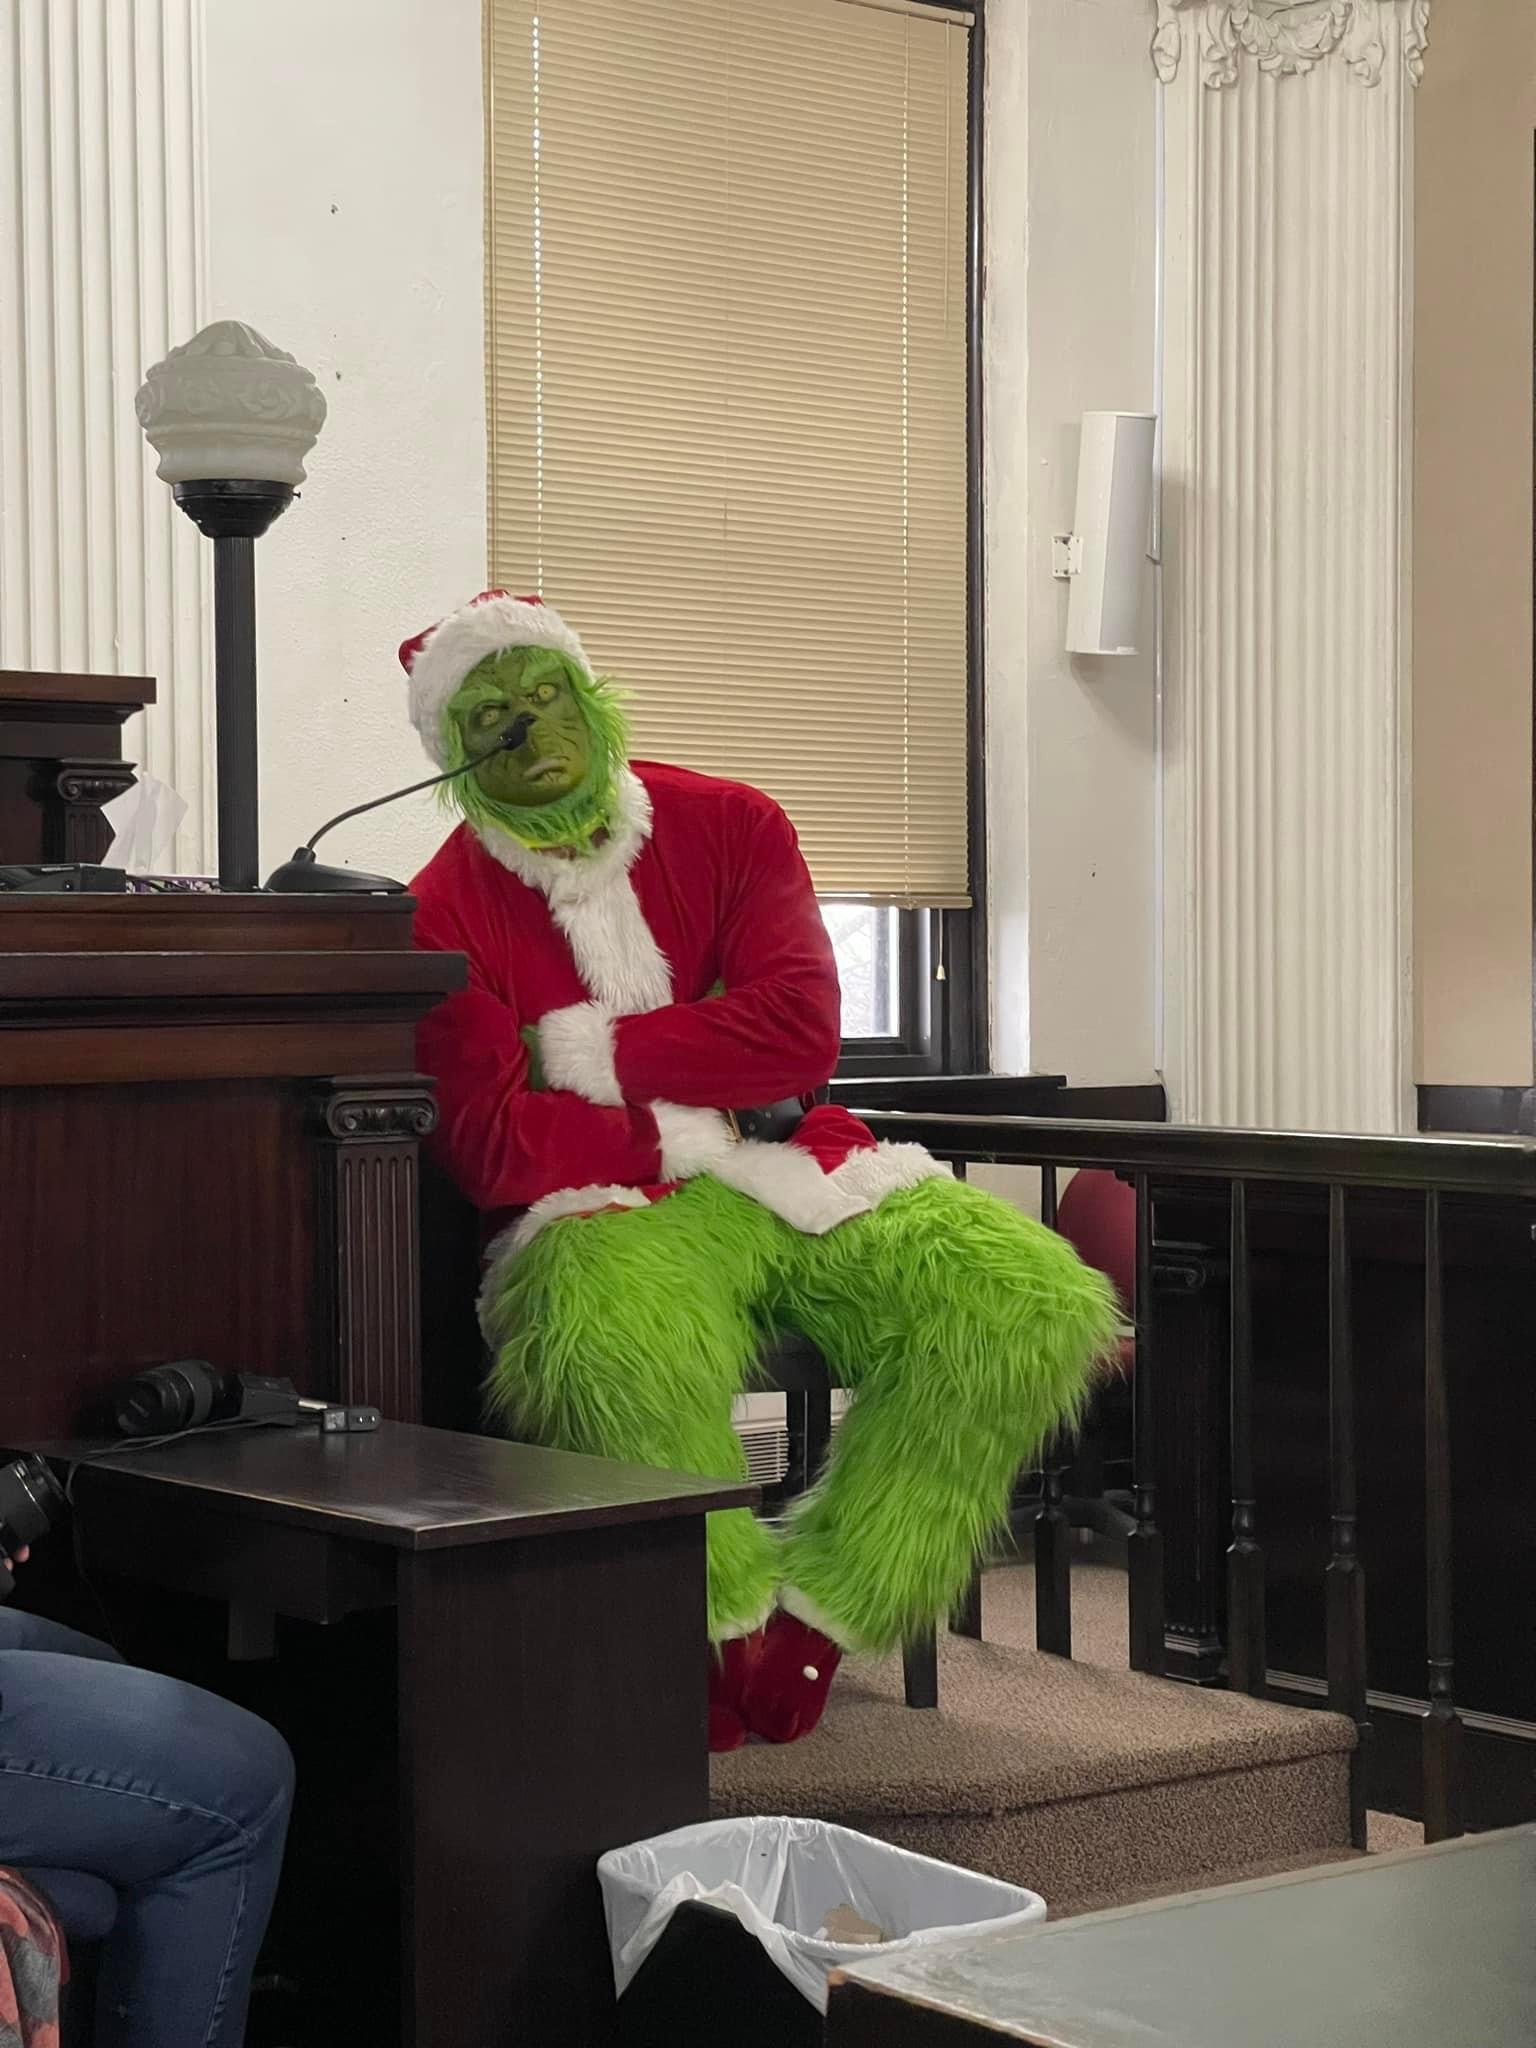 The Grinch sitting at the witness stand